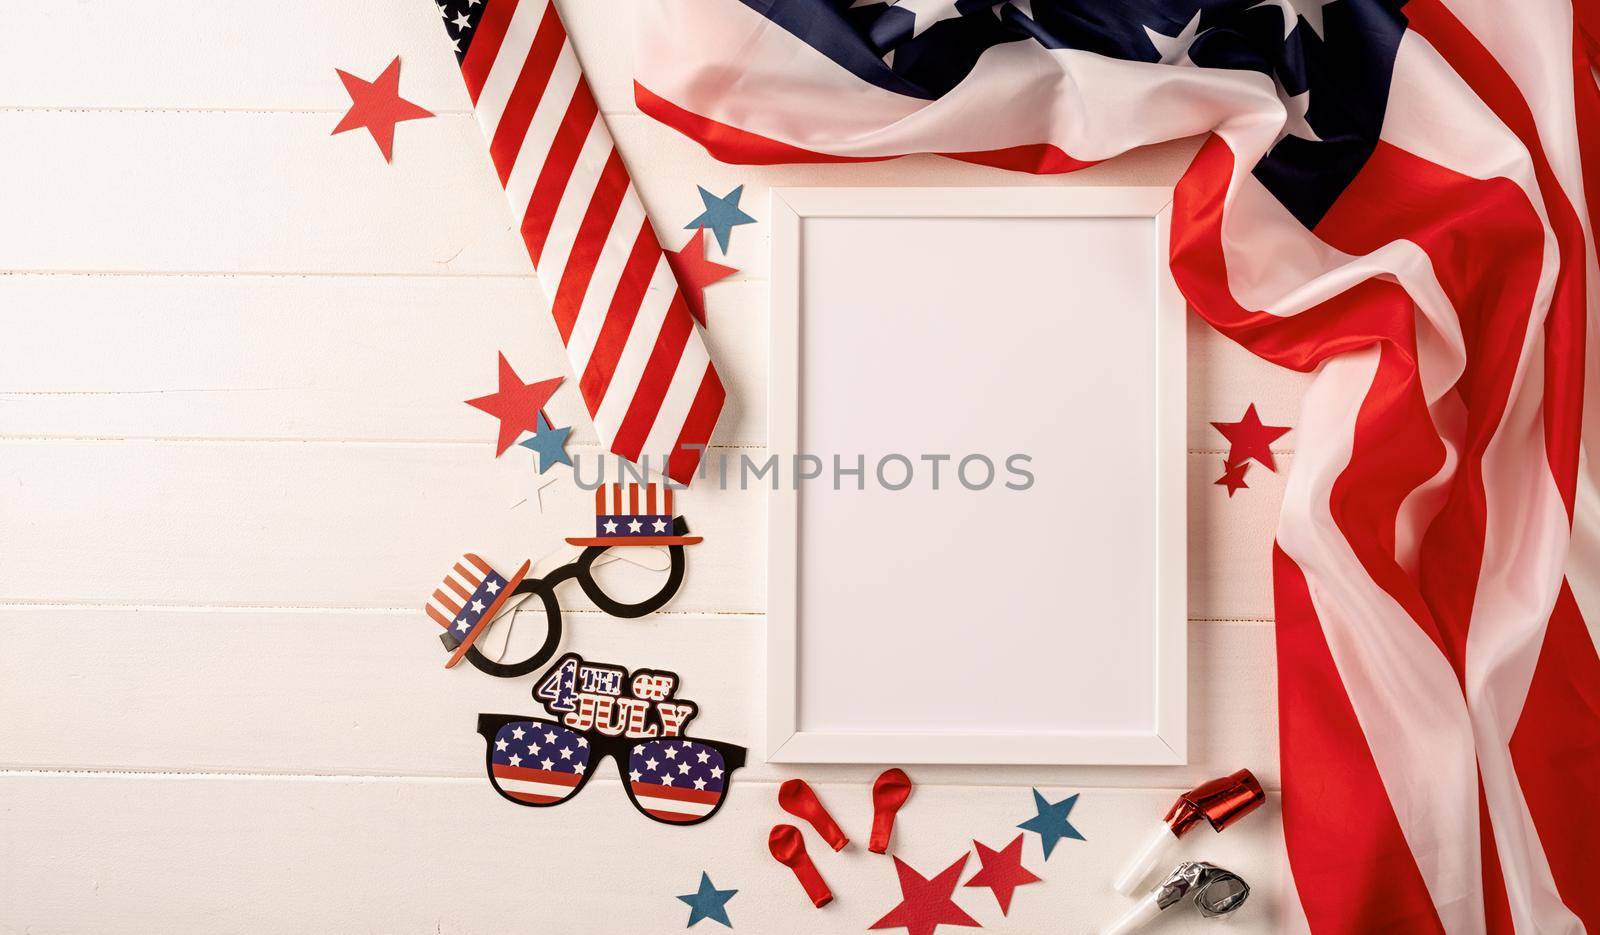 USA Memorial day, Presidents day, Veterans day, Labor day, or 4th of July celebration. Blank white photo frame for mockup design on American national flag wooden background